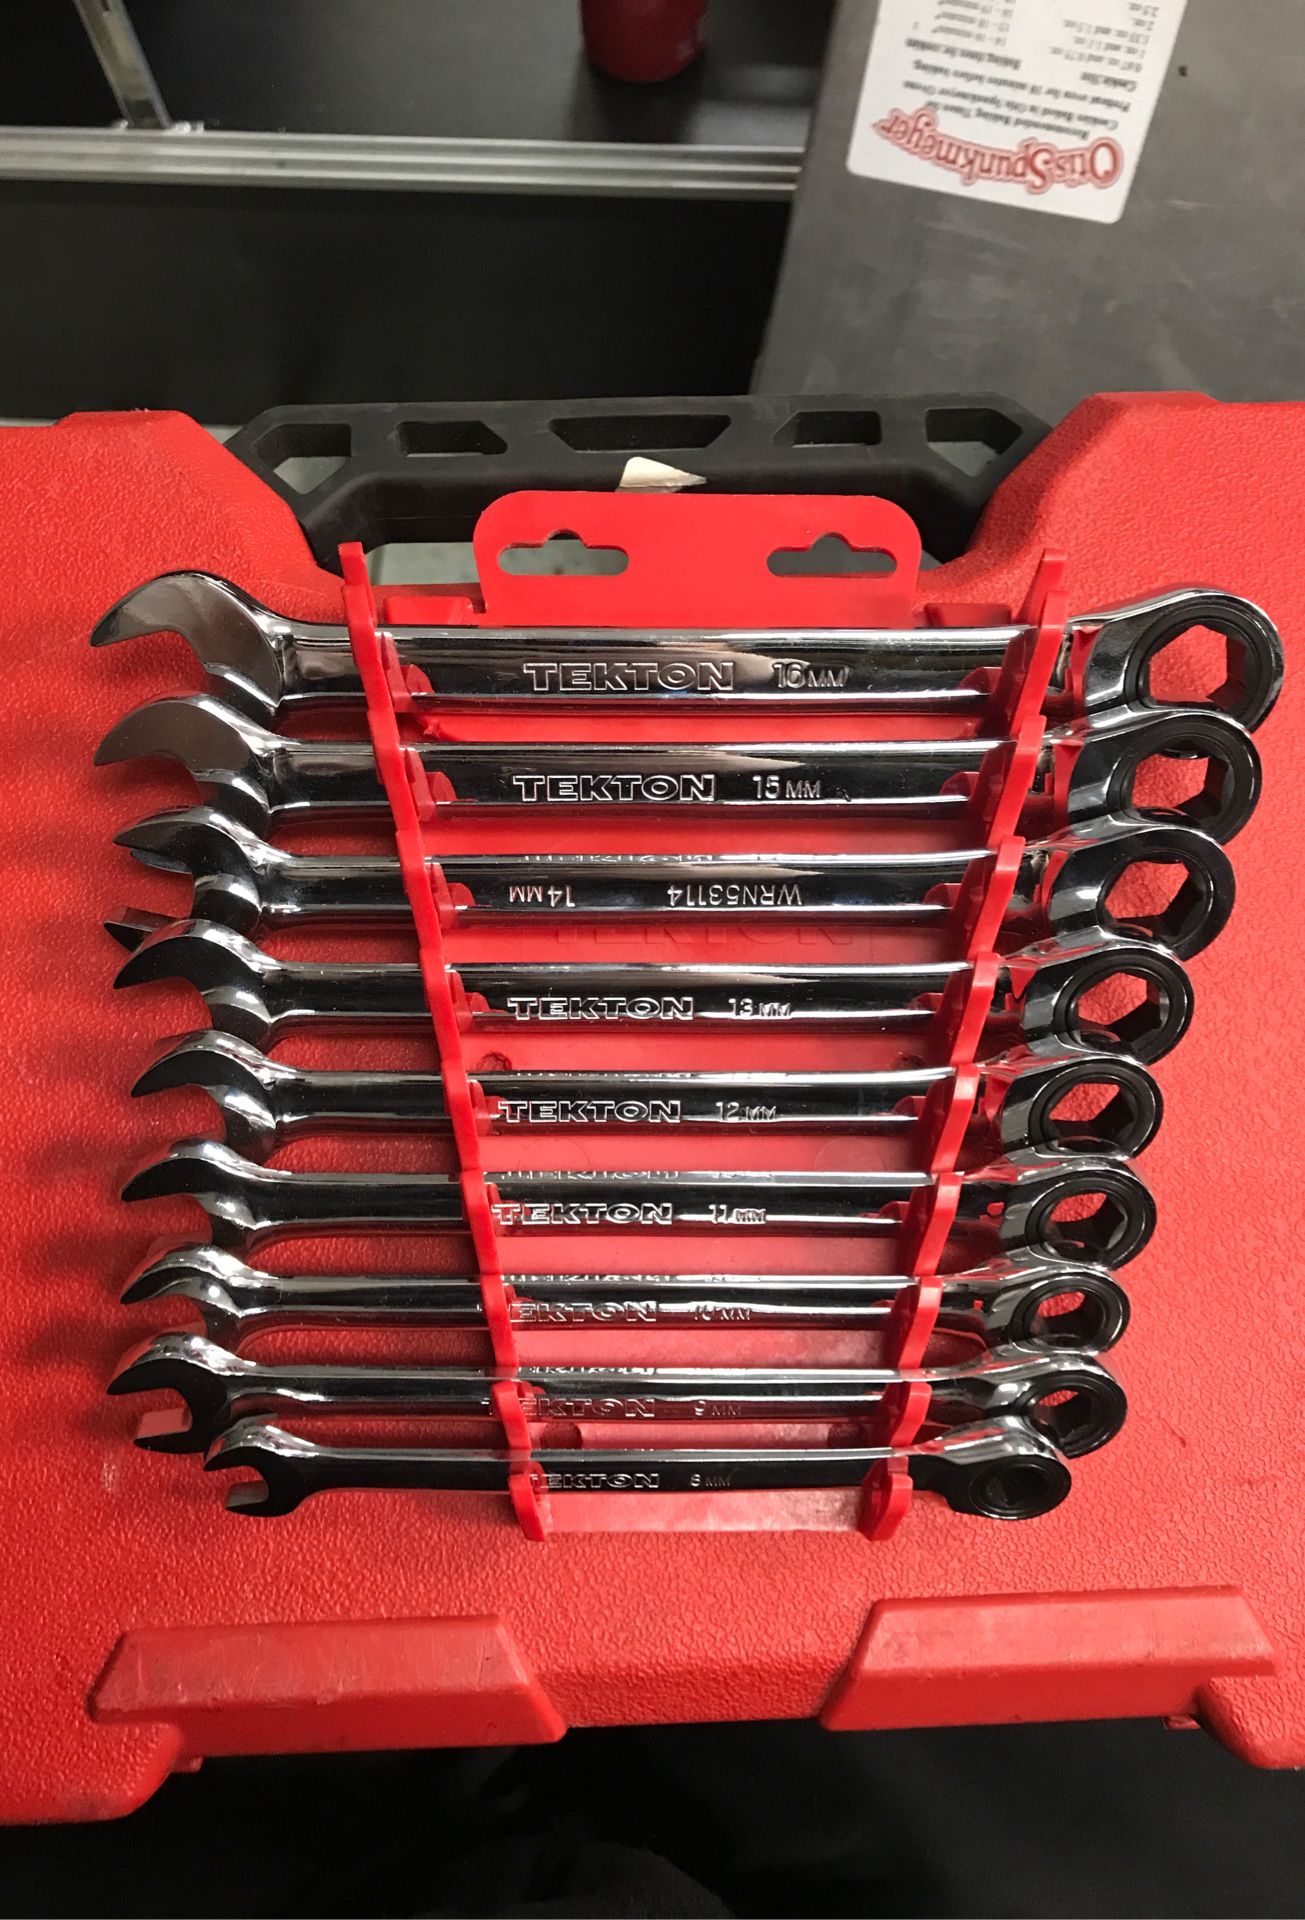 TEKTON WRN53167 Ratcheting Combination Wrench Set ,Metric, 8 mm - 16 mm, 9-Piece